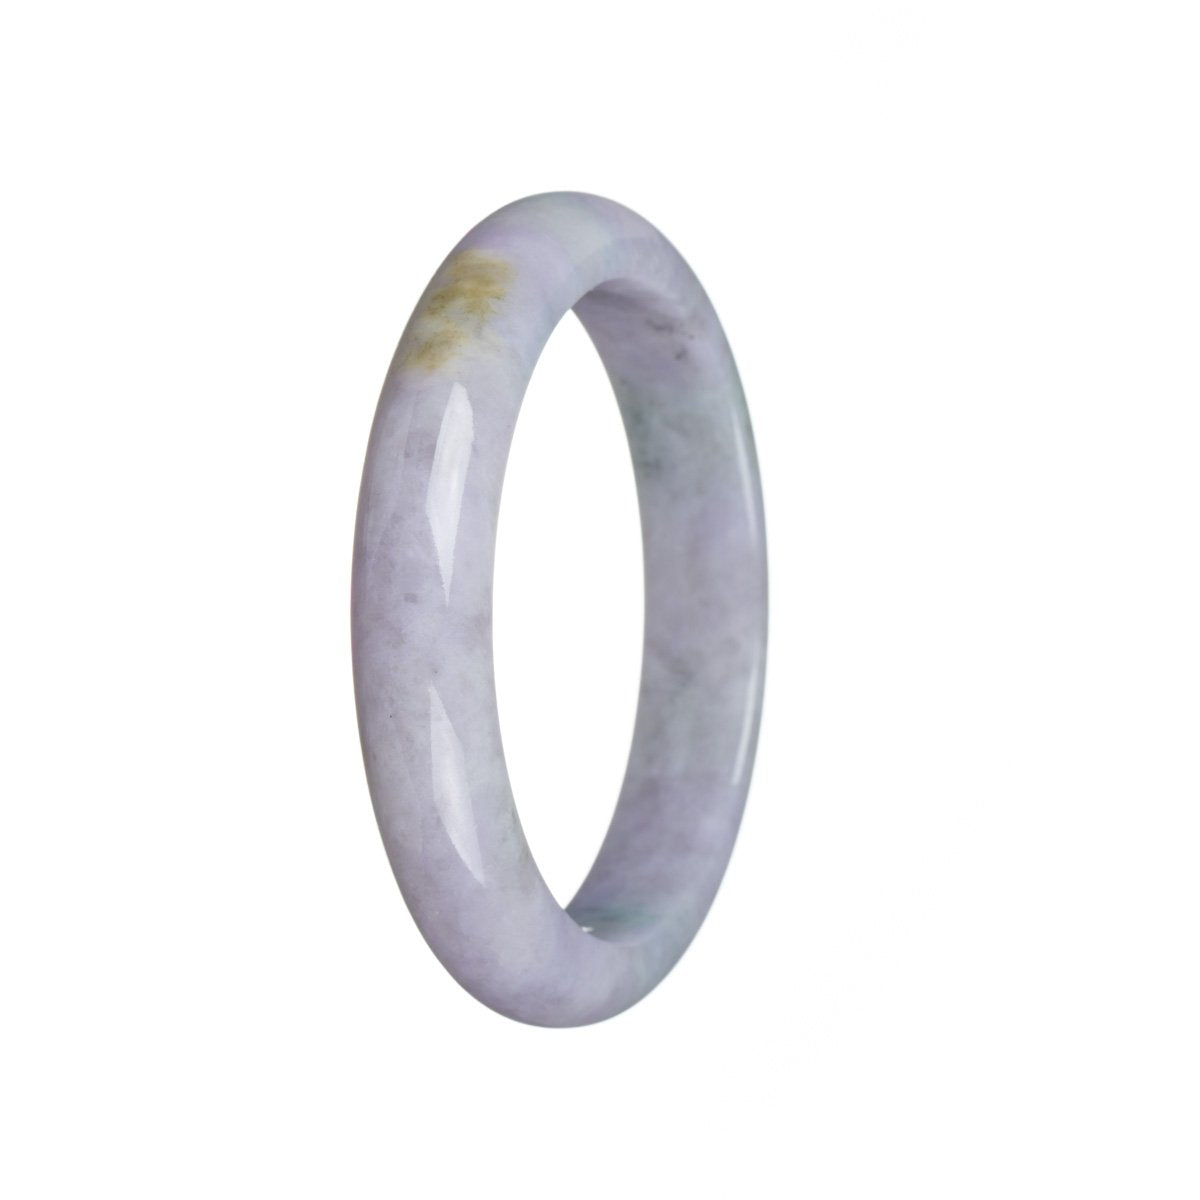 A lavender traditional jade bangle with a semi-round shape, measuring 58mm.